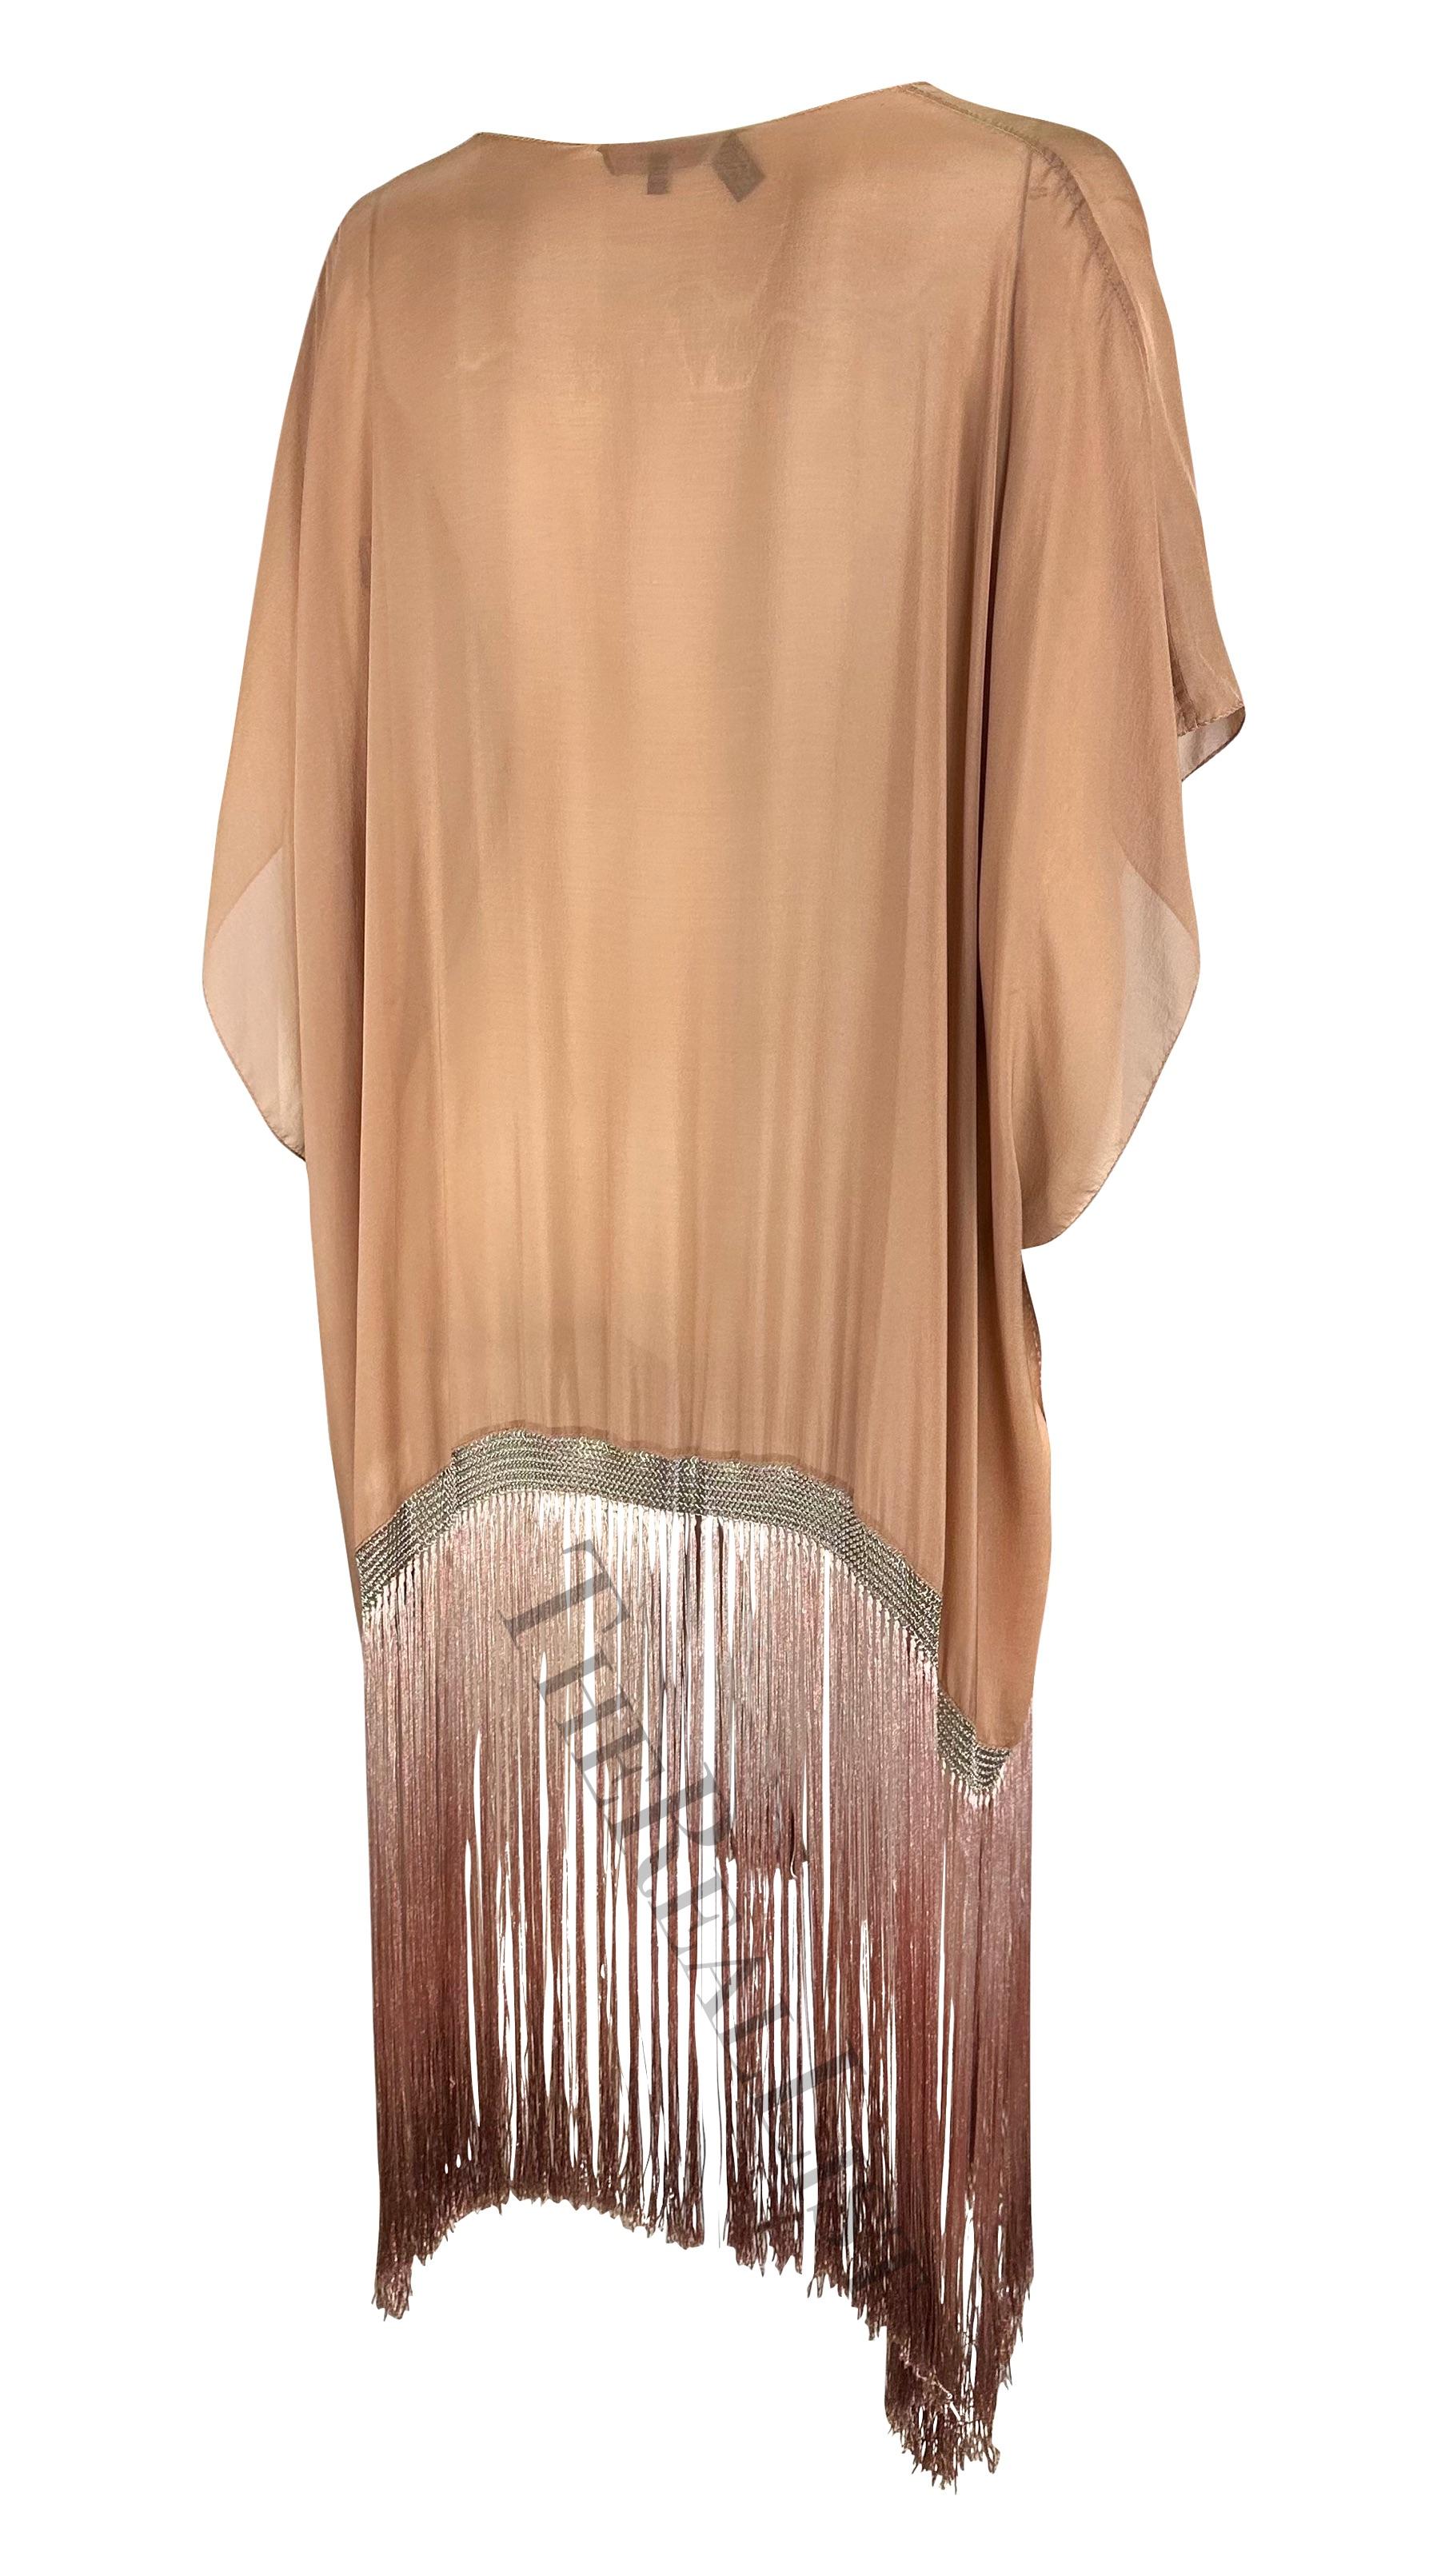 S/S 2004 Gucci by Tom Ford Chain Link Peach Ombré Fringe Kaftan Cover Up  5